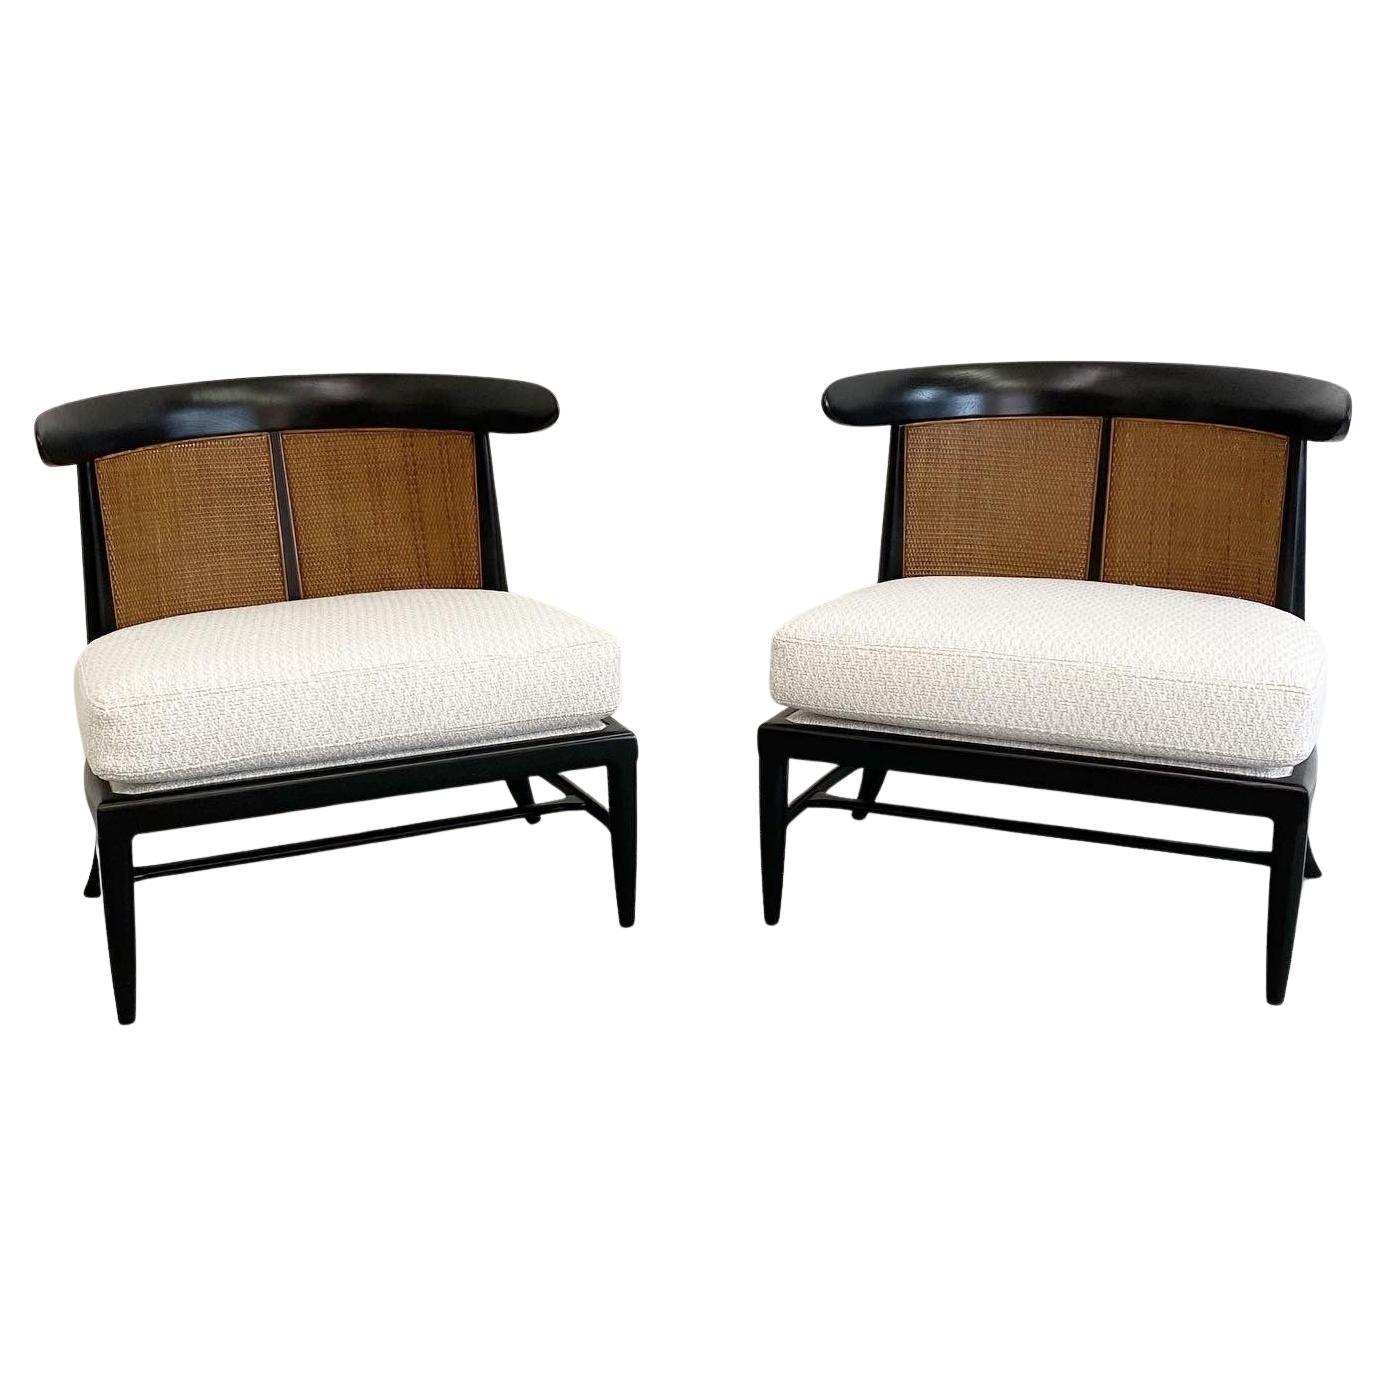 Tomlinson Sophisticate Slipper Chairs, a Pair